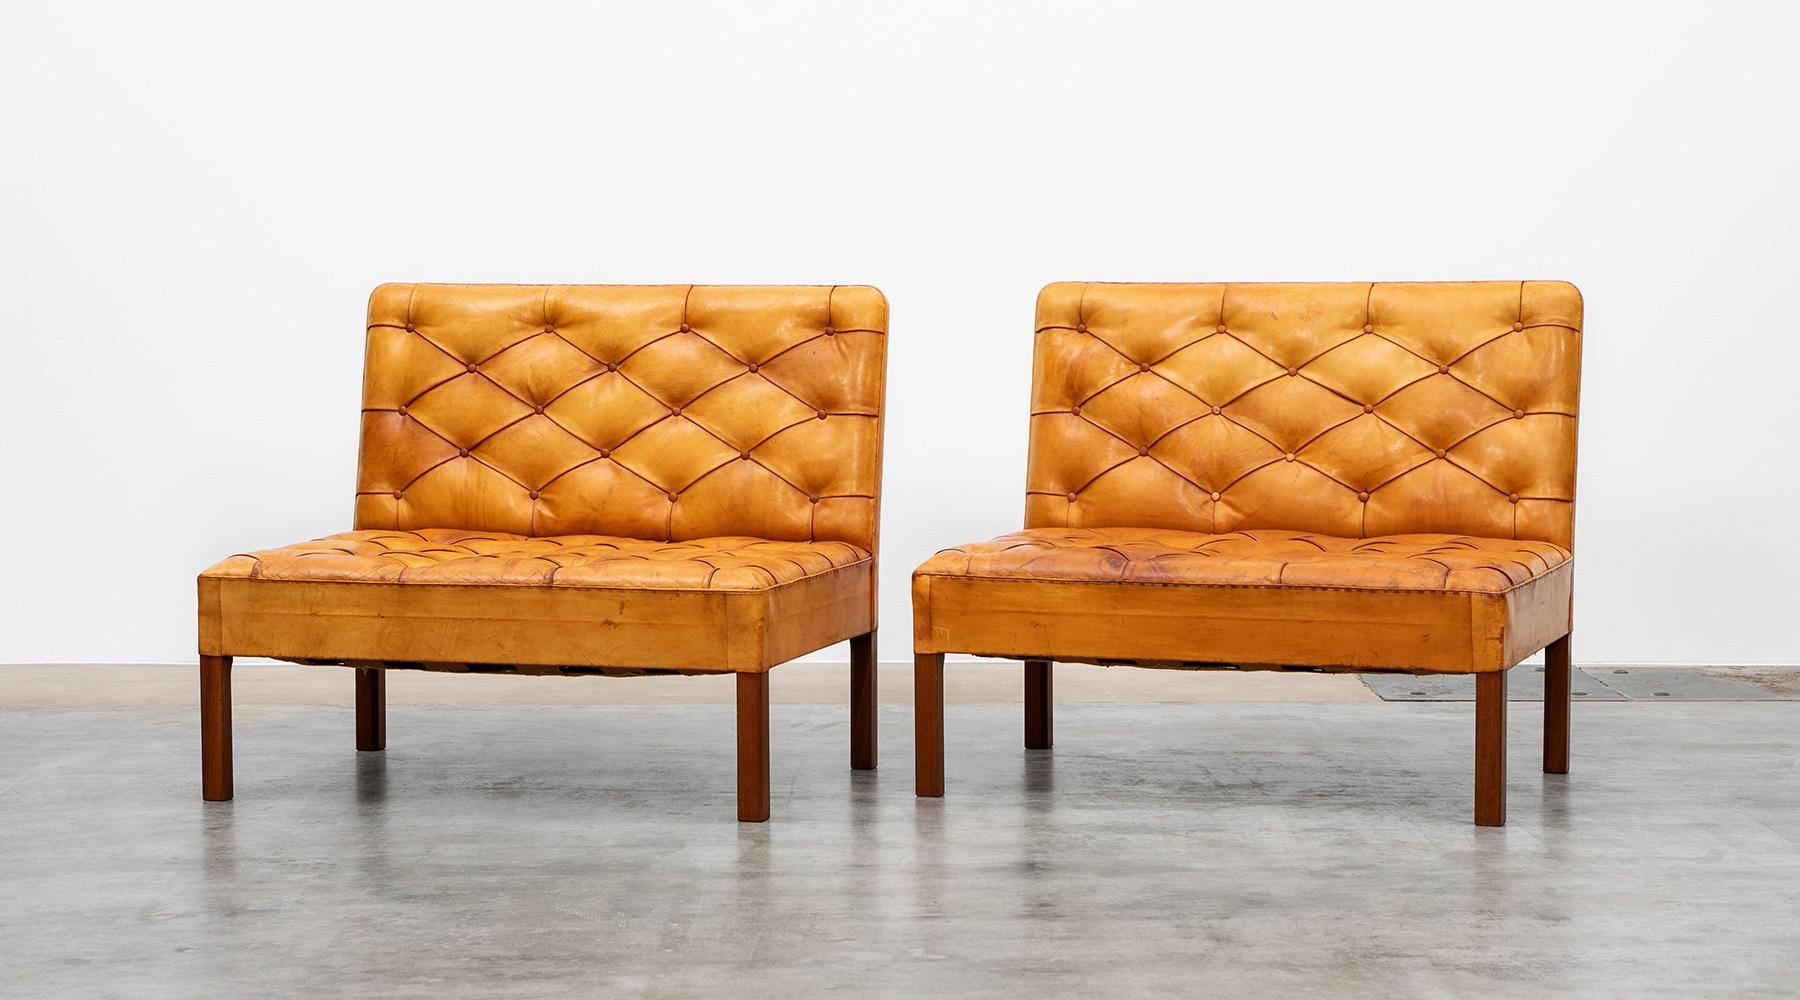 Sofa units by Kaare Klint for Rud Rassmussen, niger leather, mahogany, Denmark, 1933.

Two exceptional pieces that stand for midcentury design in its highest quality class. Excellent pair of freestanding mahogany sofas. All sides, seat and back